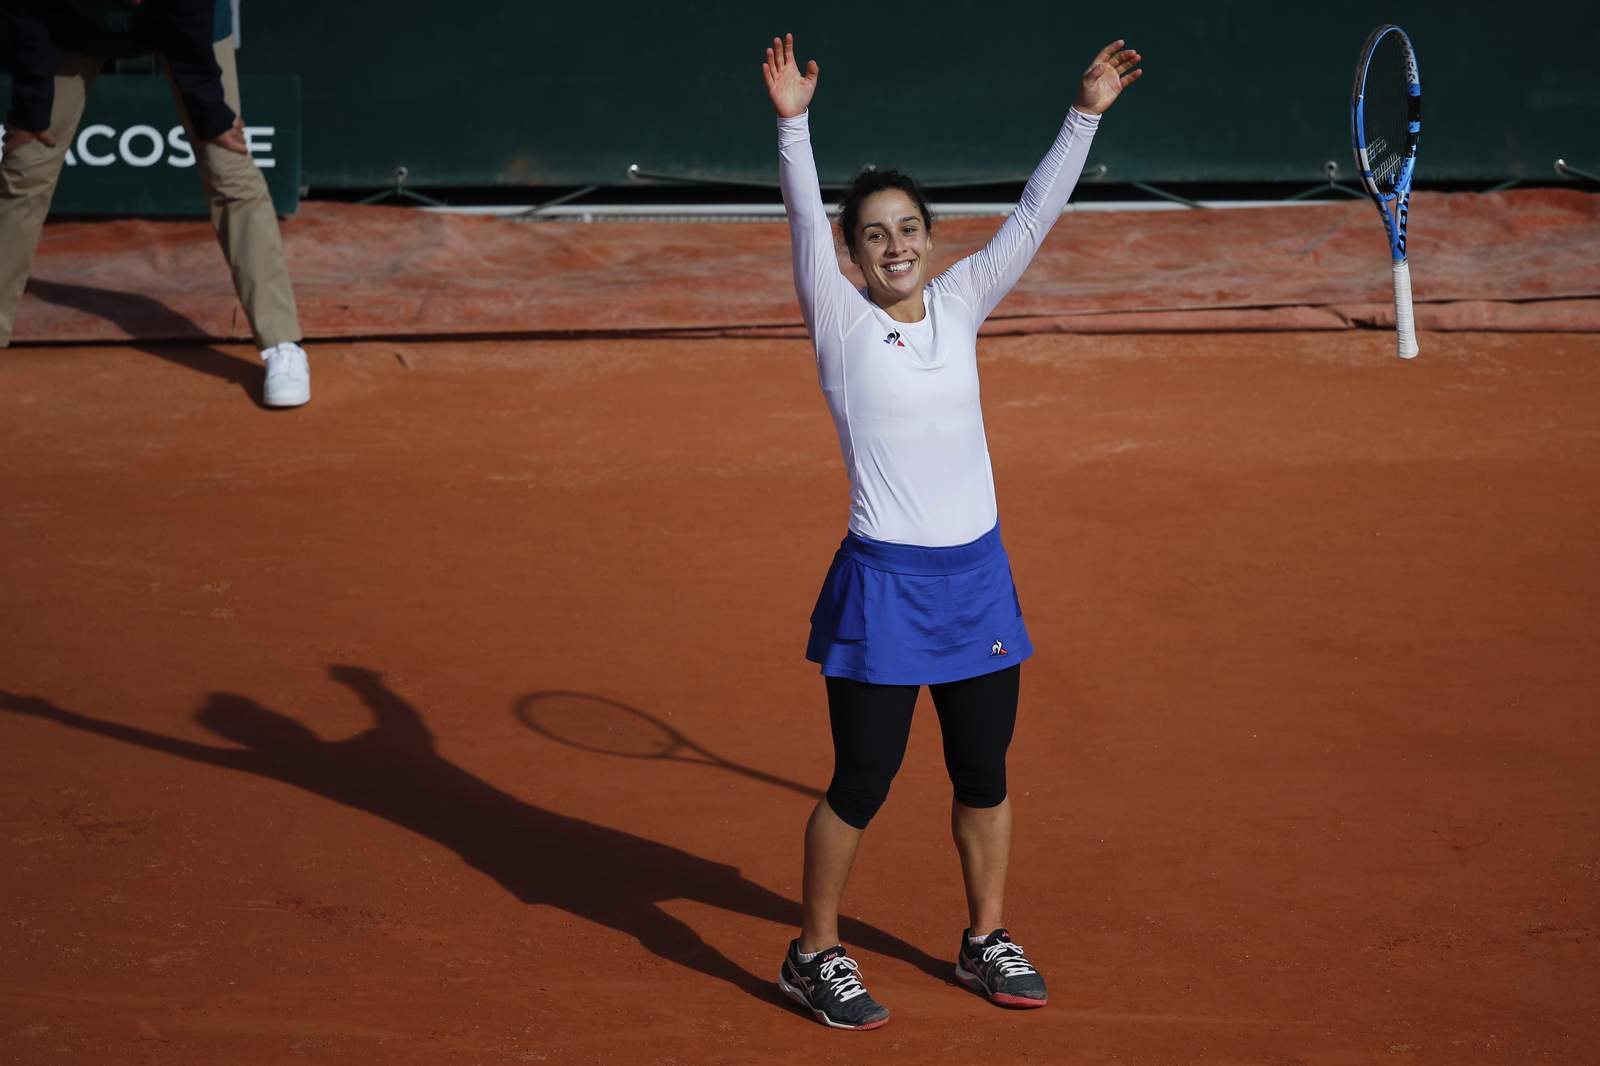 Years after anorexia, hiatus, Italian reaches French Open QF